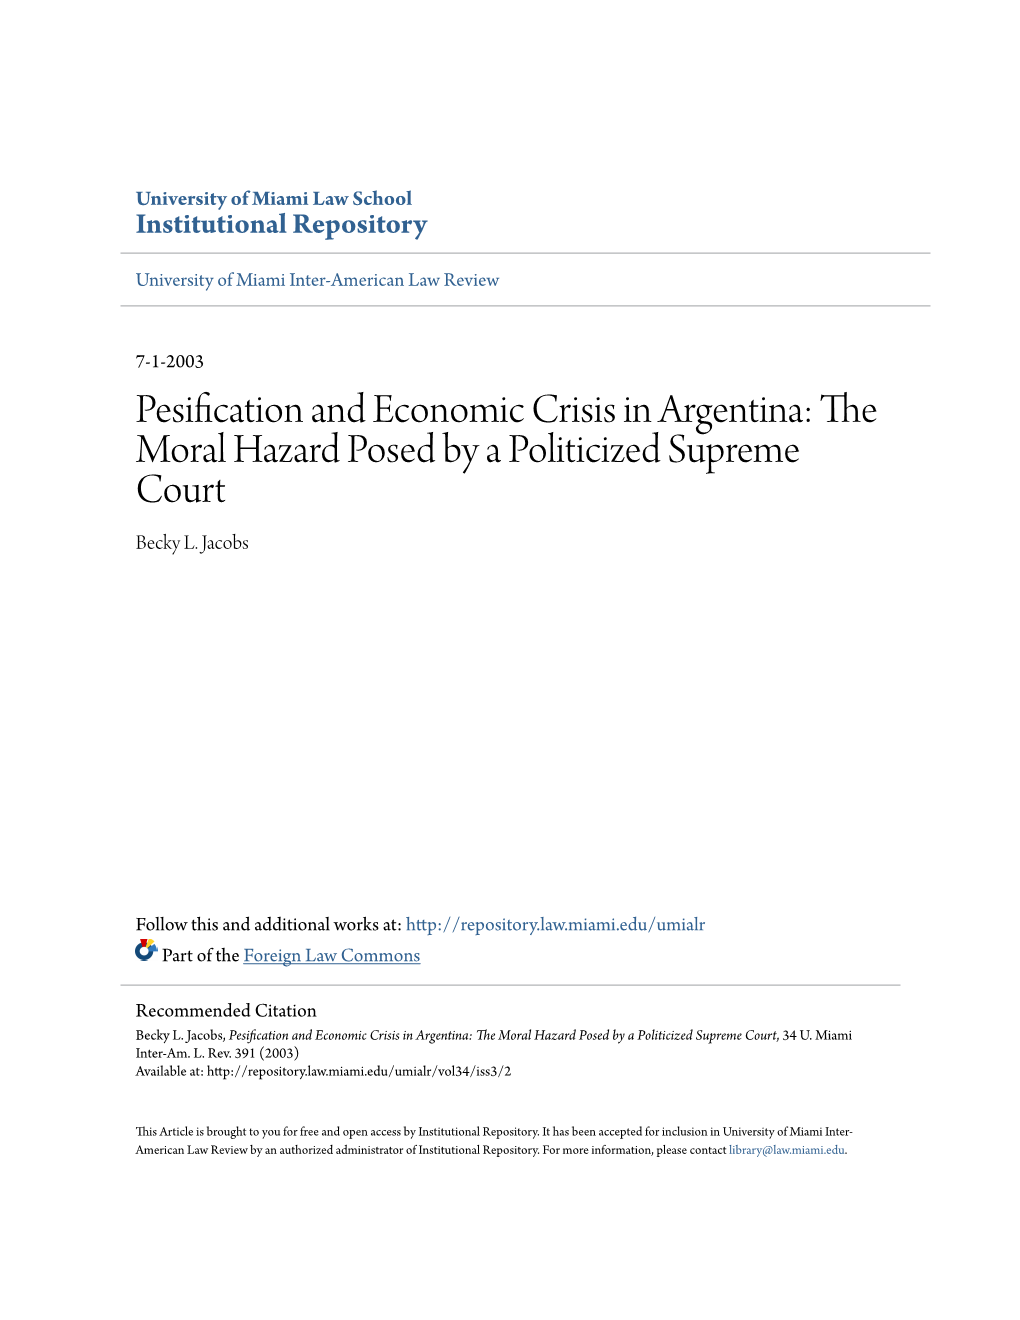 Pesification and Economic Crisis in Argentina: the Moral Hazard Posed by a Politicized Supreme Court Becky L